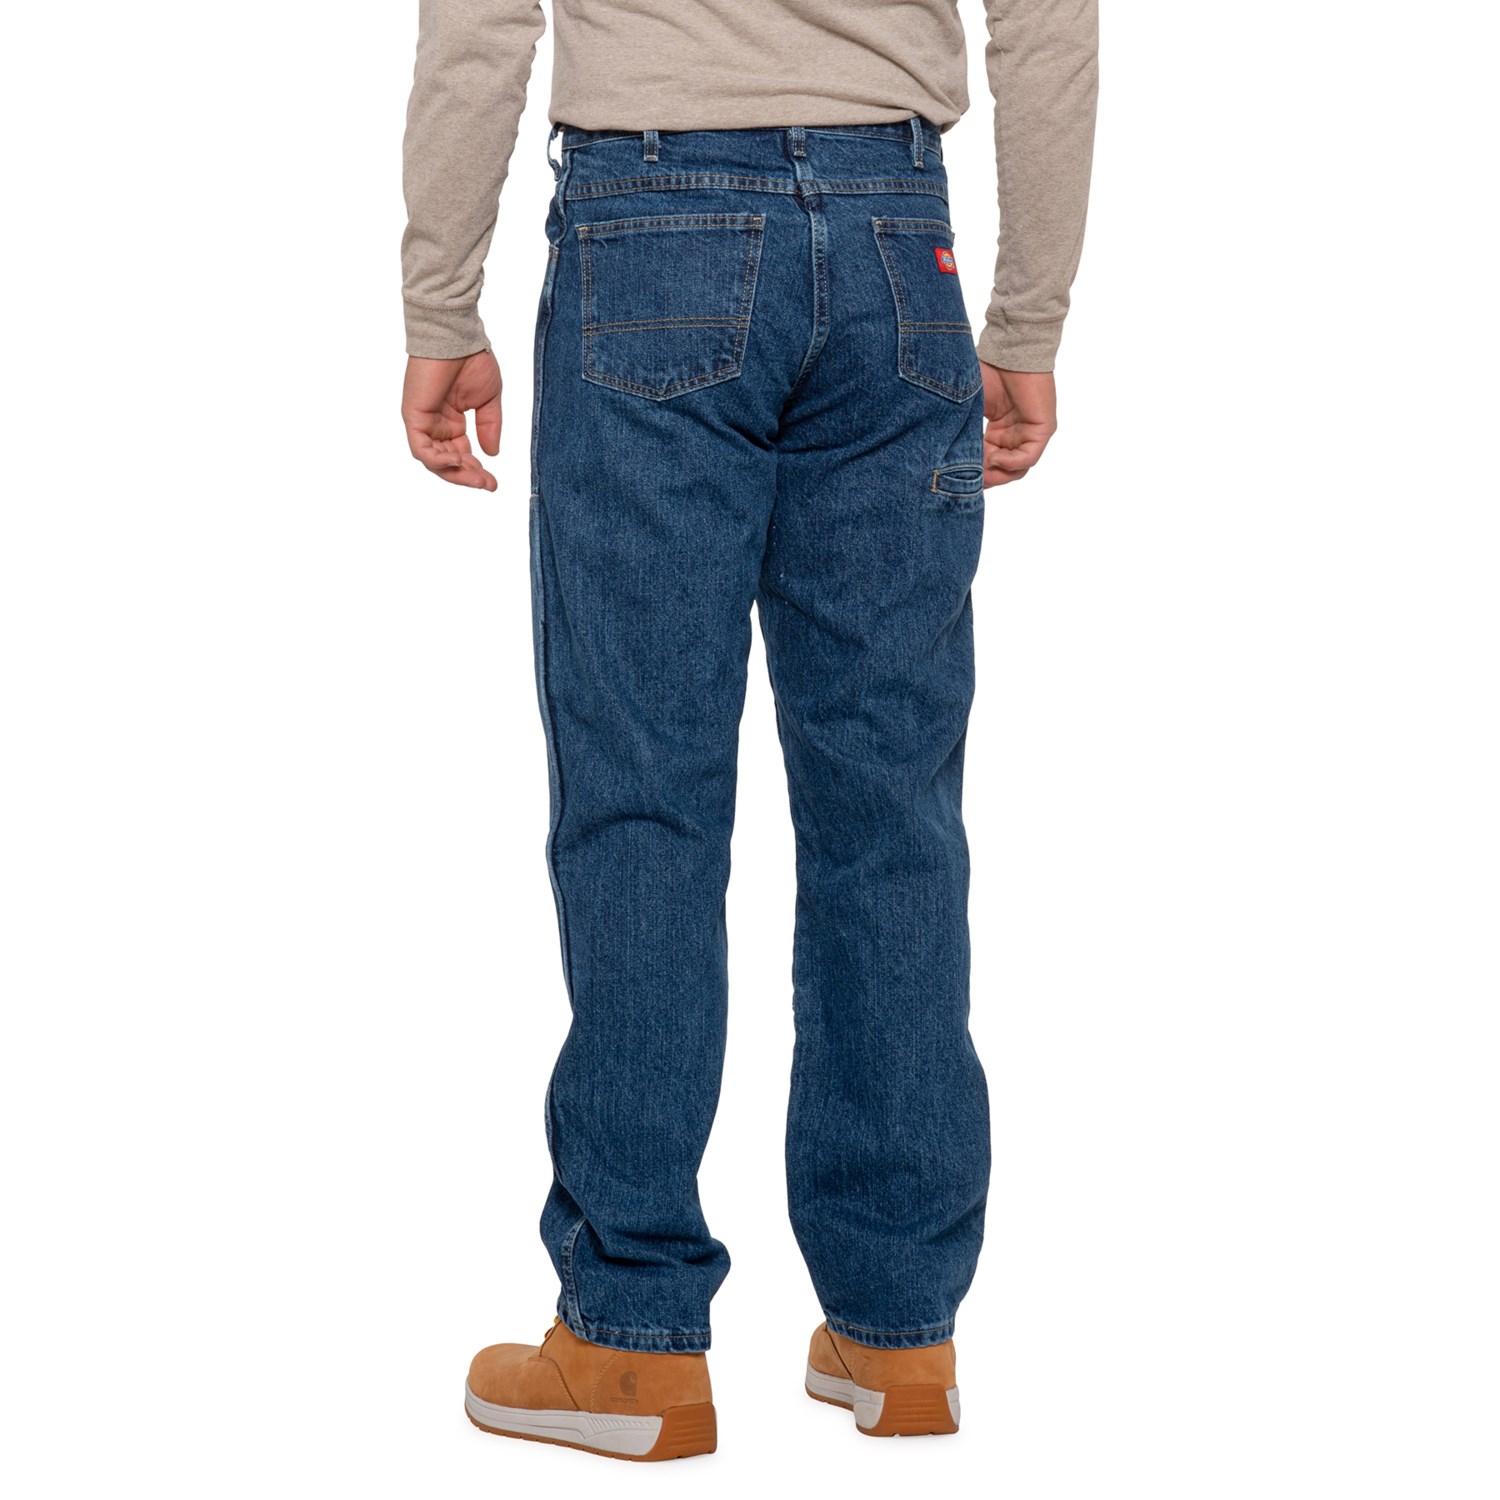 Dickies Workhorse Double-Knee Denim Jeans (For Men) - Save 42%